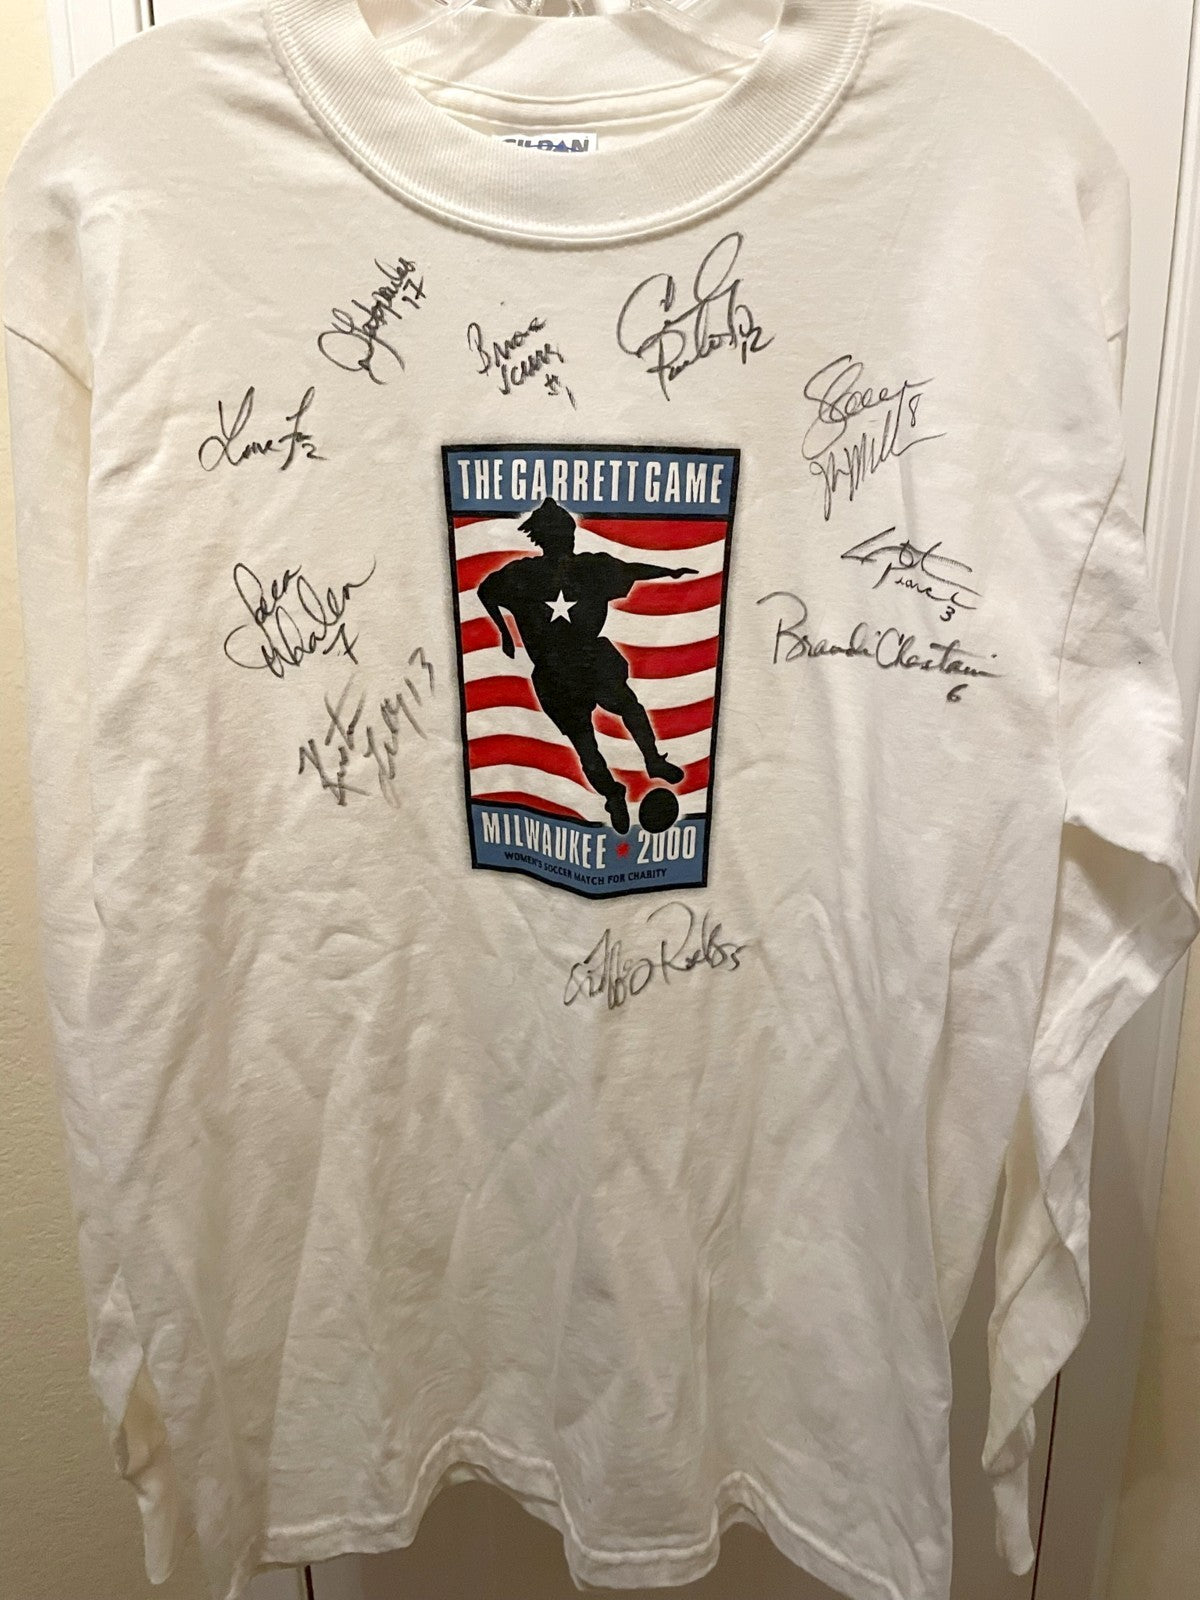 1999 US Women's World Cup soccer team autographed T-shirt (Brandi Chastain Kristine Lilly Briana Scurry) JSA